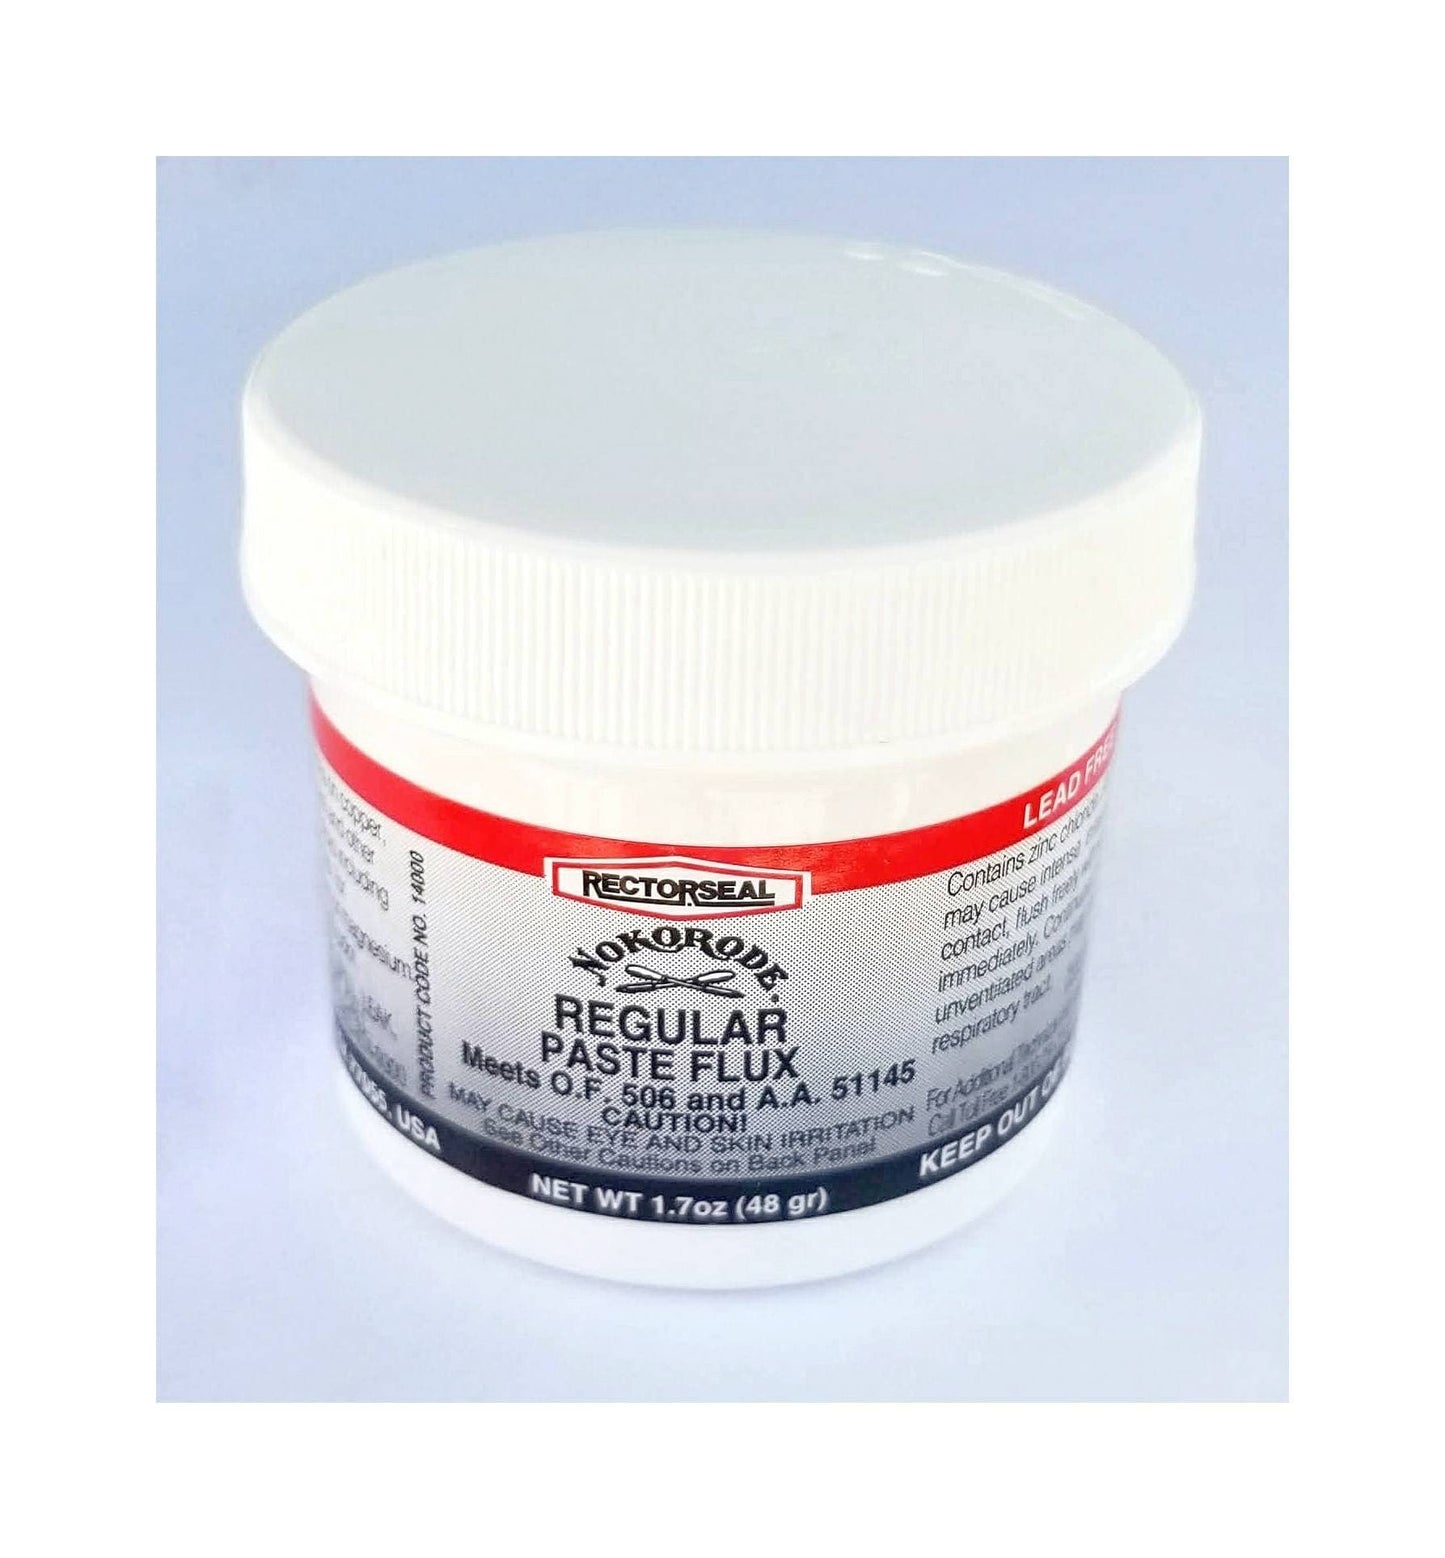 Nokorode Paste Flux. Formulated for Stained Glass, Copper Foil or Came. Lead free metals, wire & decorative soldering.